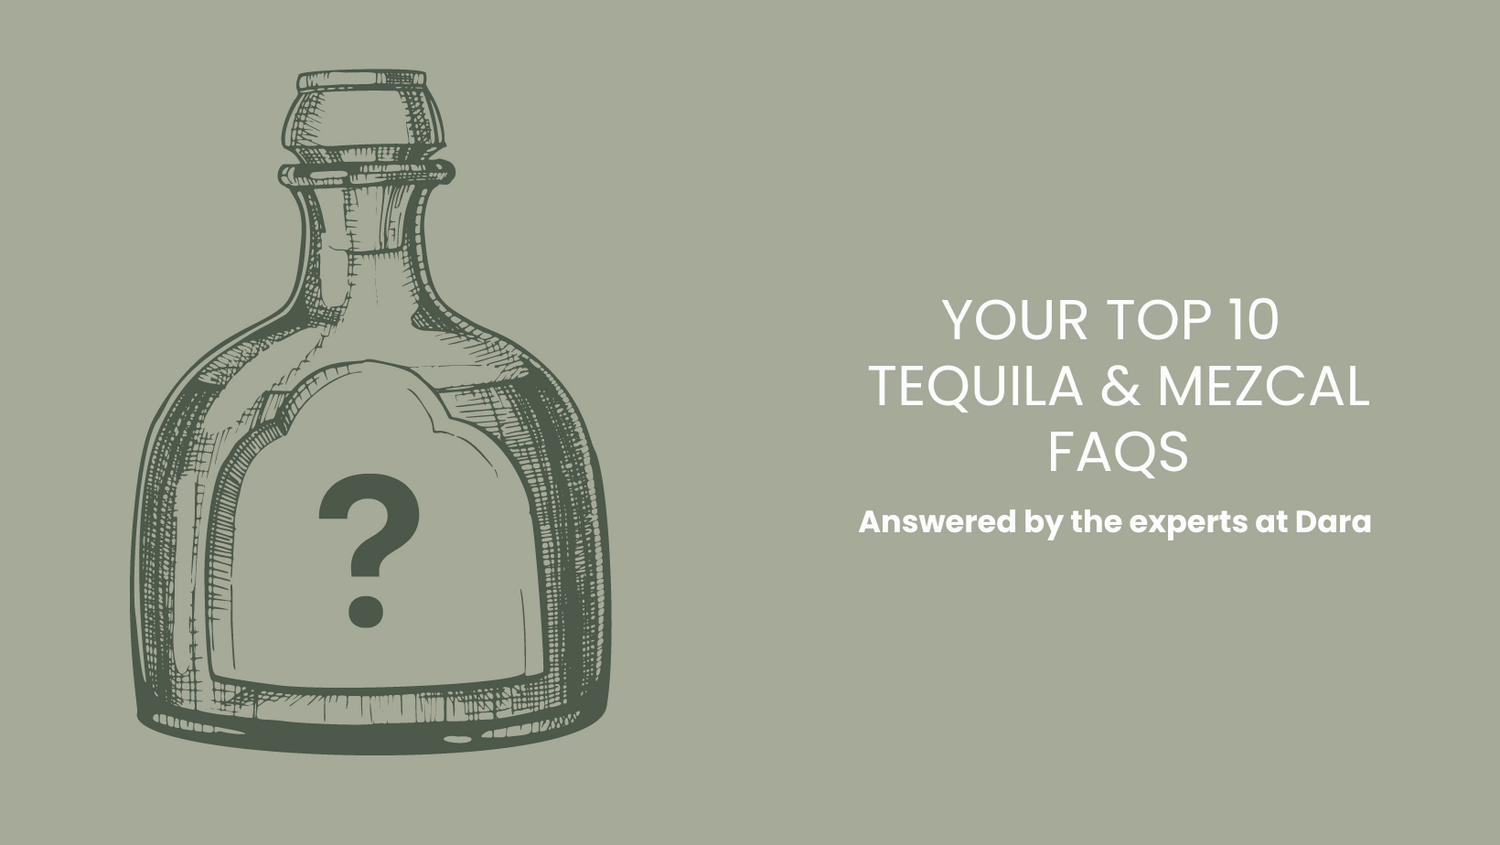 Your Top 10 Tequila & Mezcal FAQs